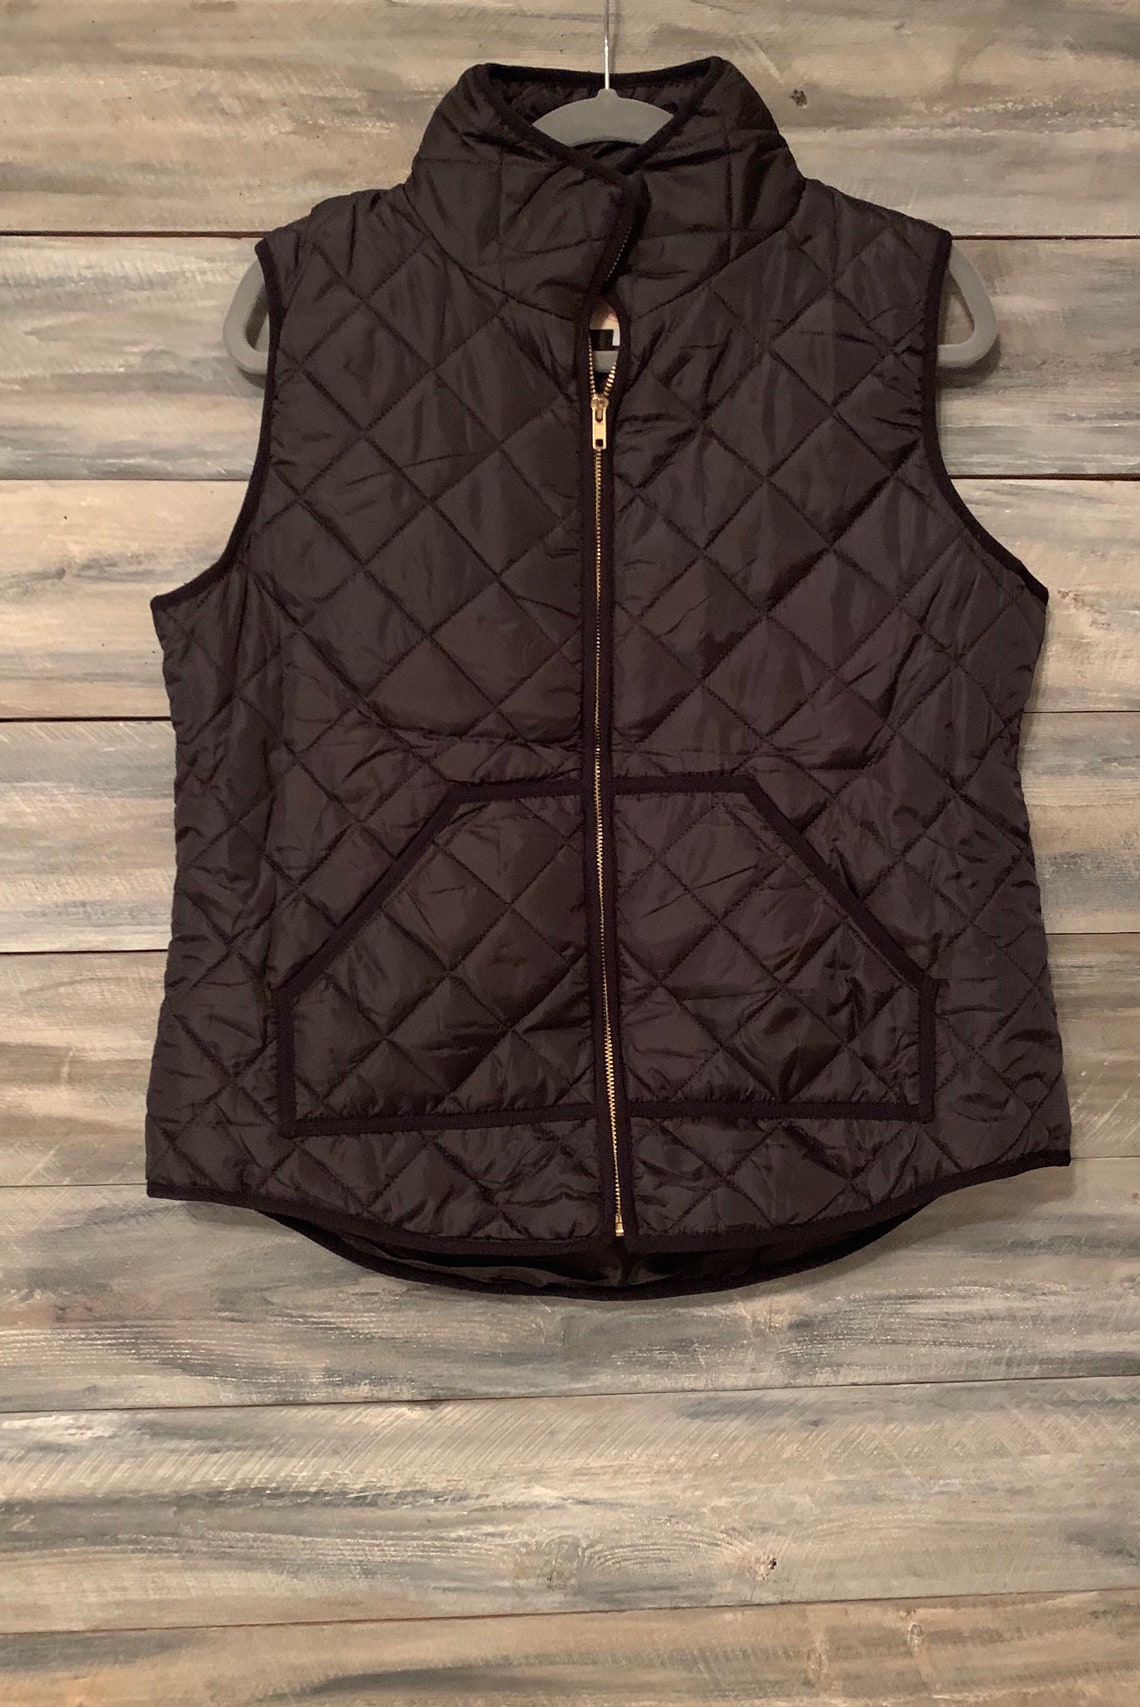 Monogram Vest Monogram Vest Black Monogram Vest Quilted | Etsy